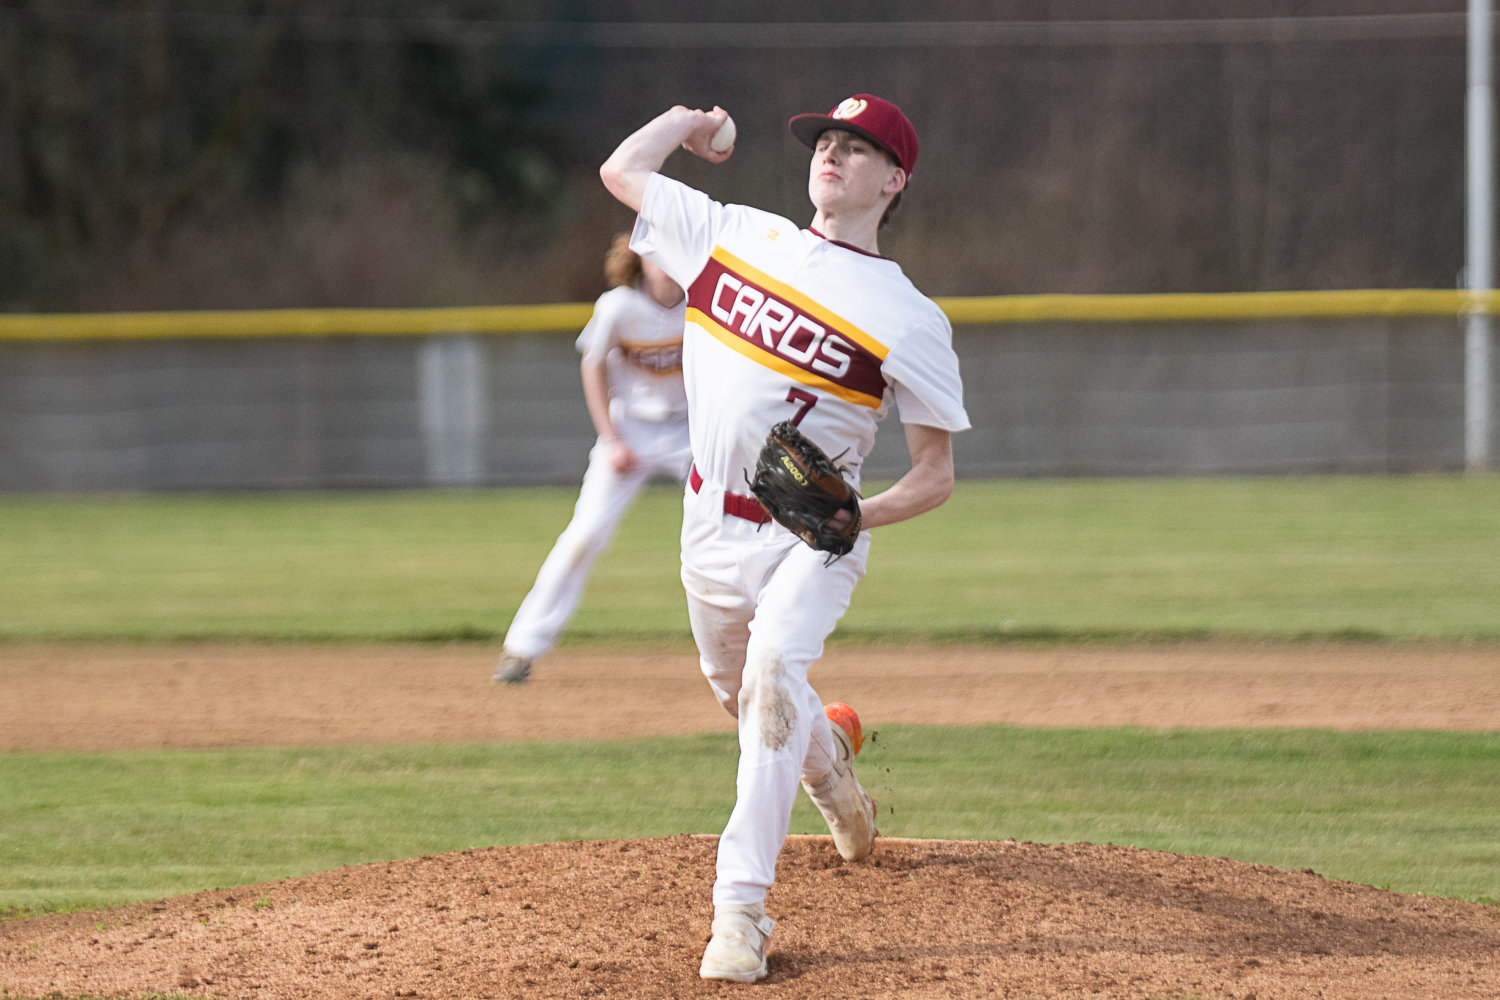 Carter Svenson throws a pitch during Winlock's first game against MWP on March 27.